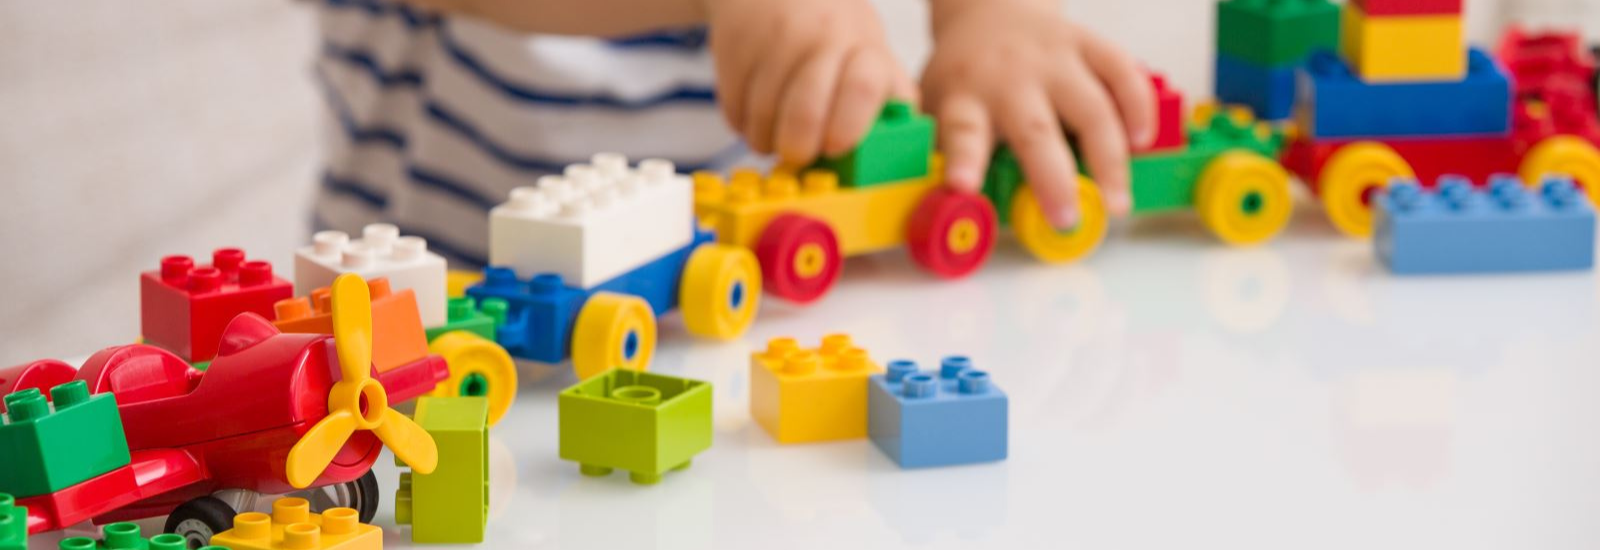 Child playing with lego banner image